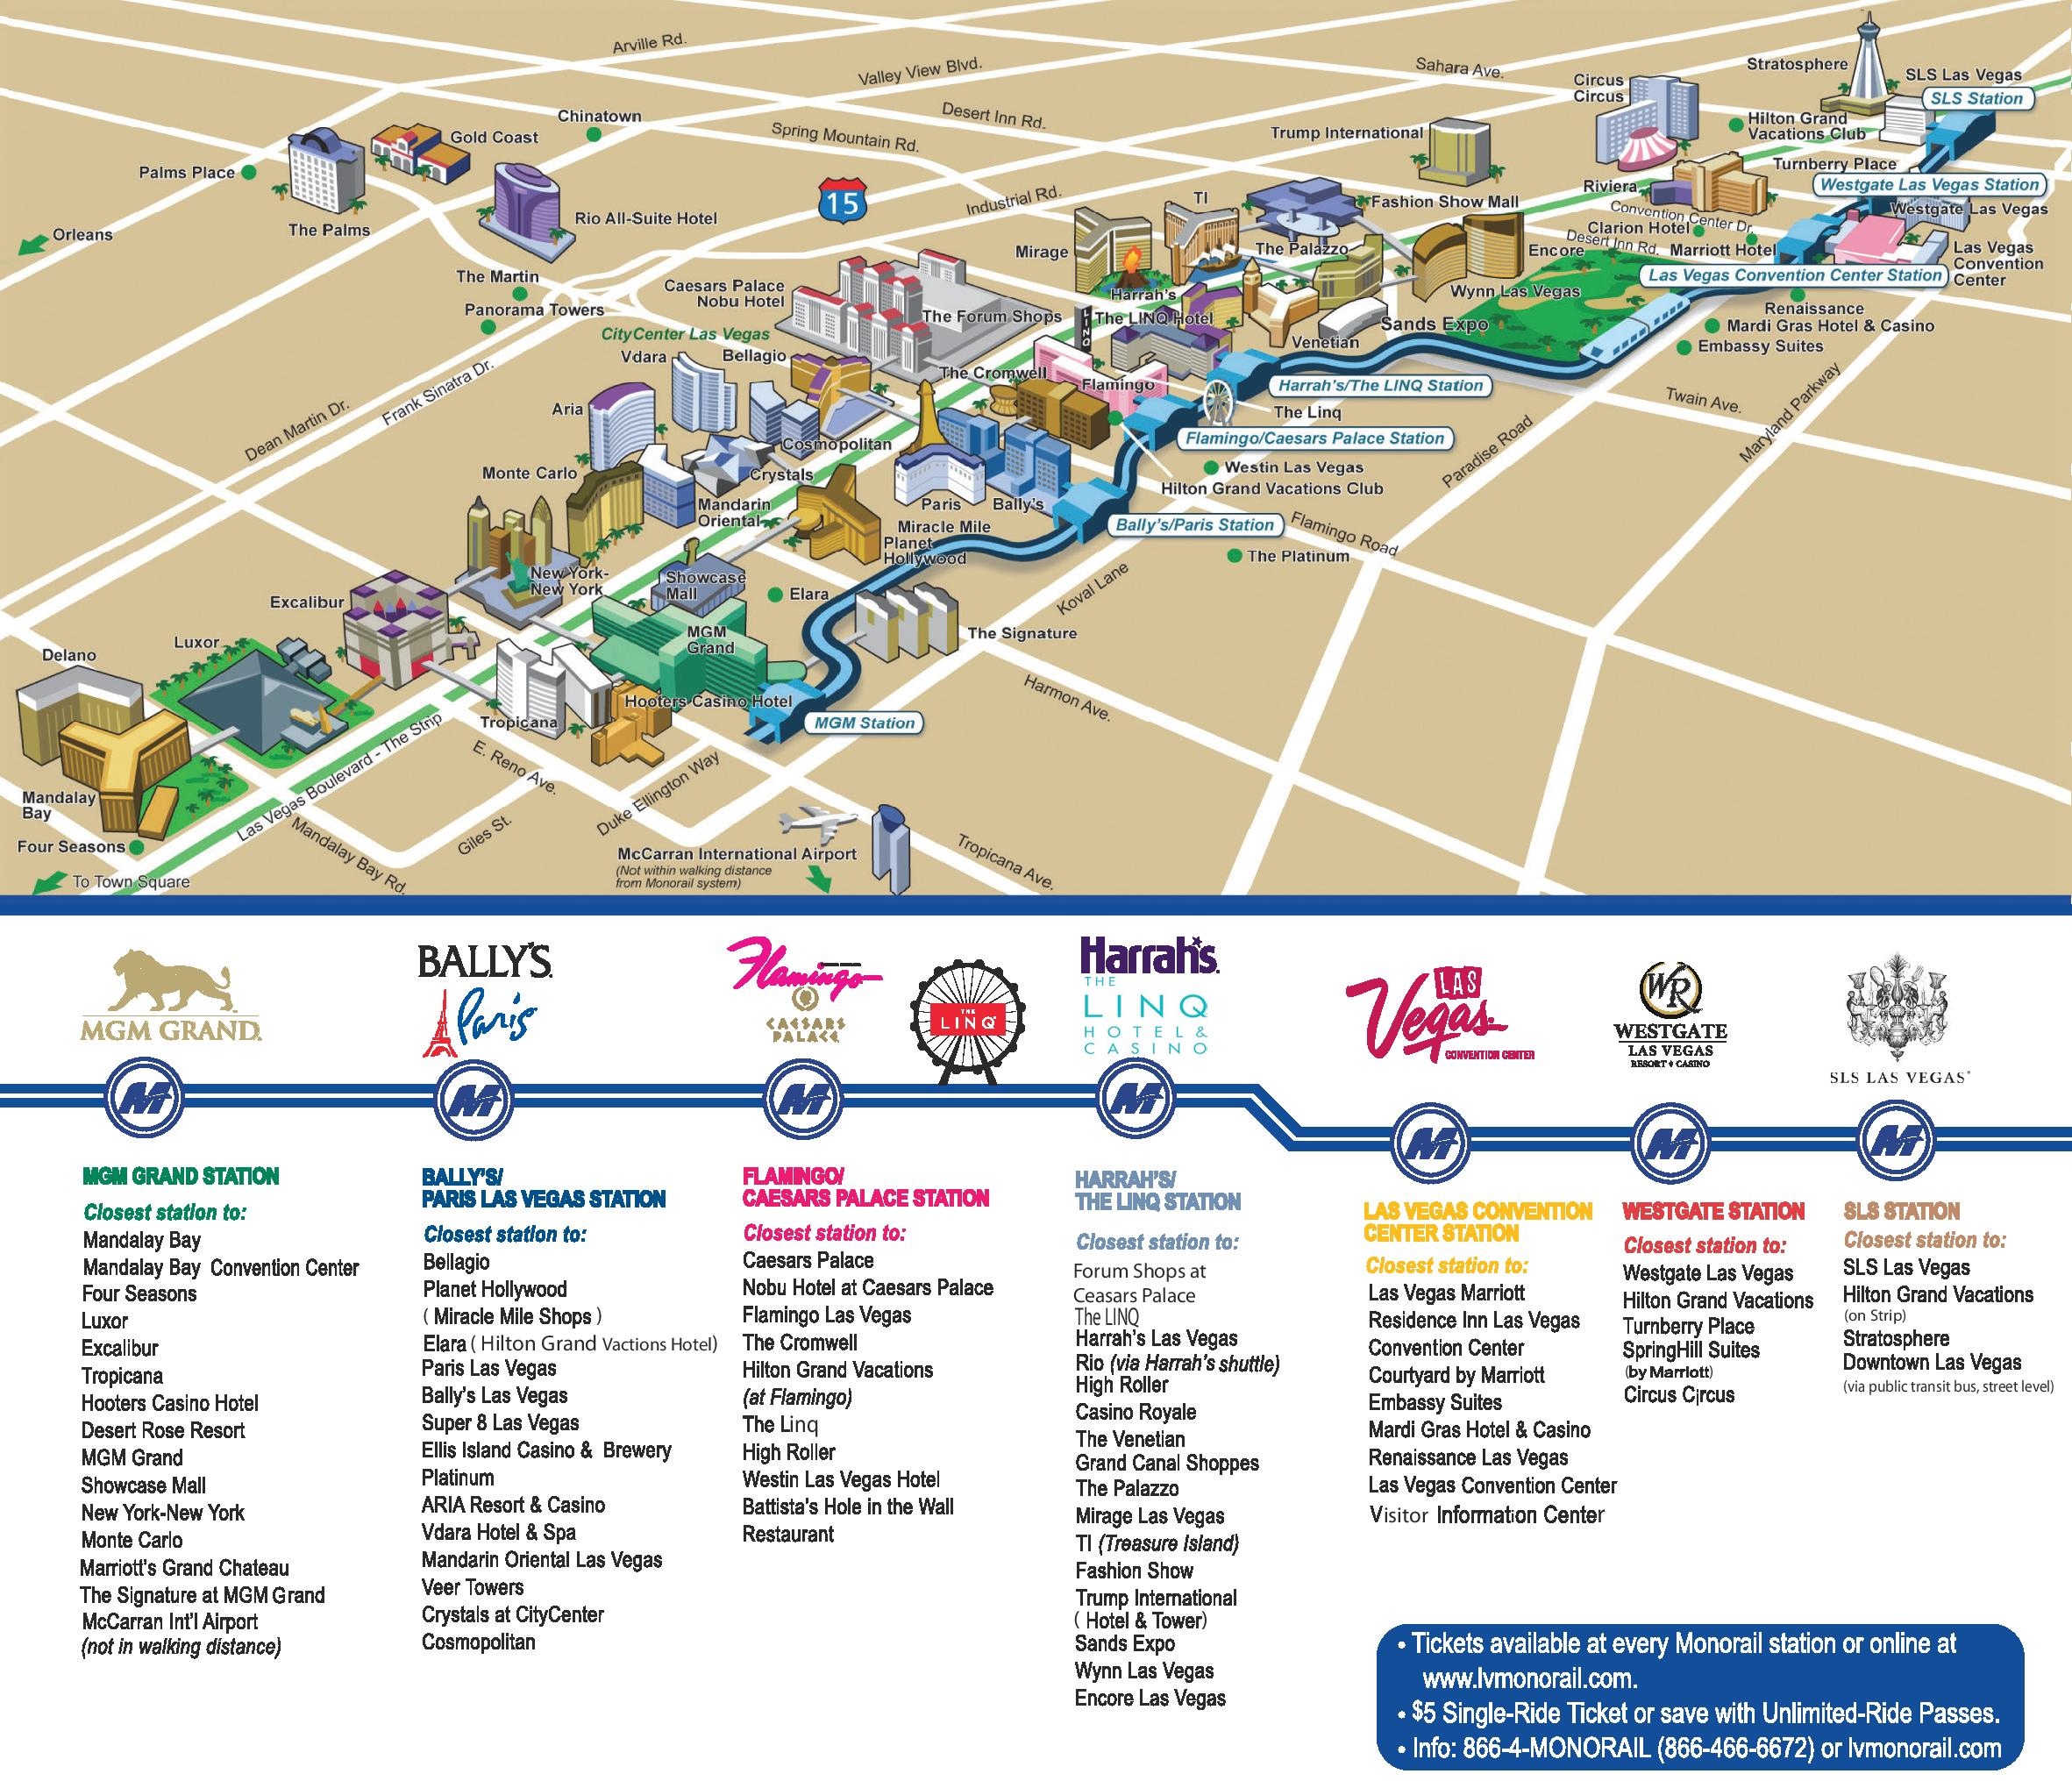 Las Vegas Strip Hotels And Casinos Map